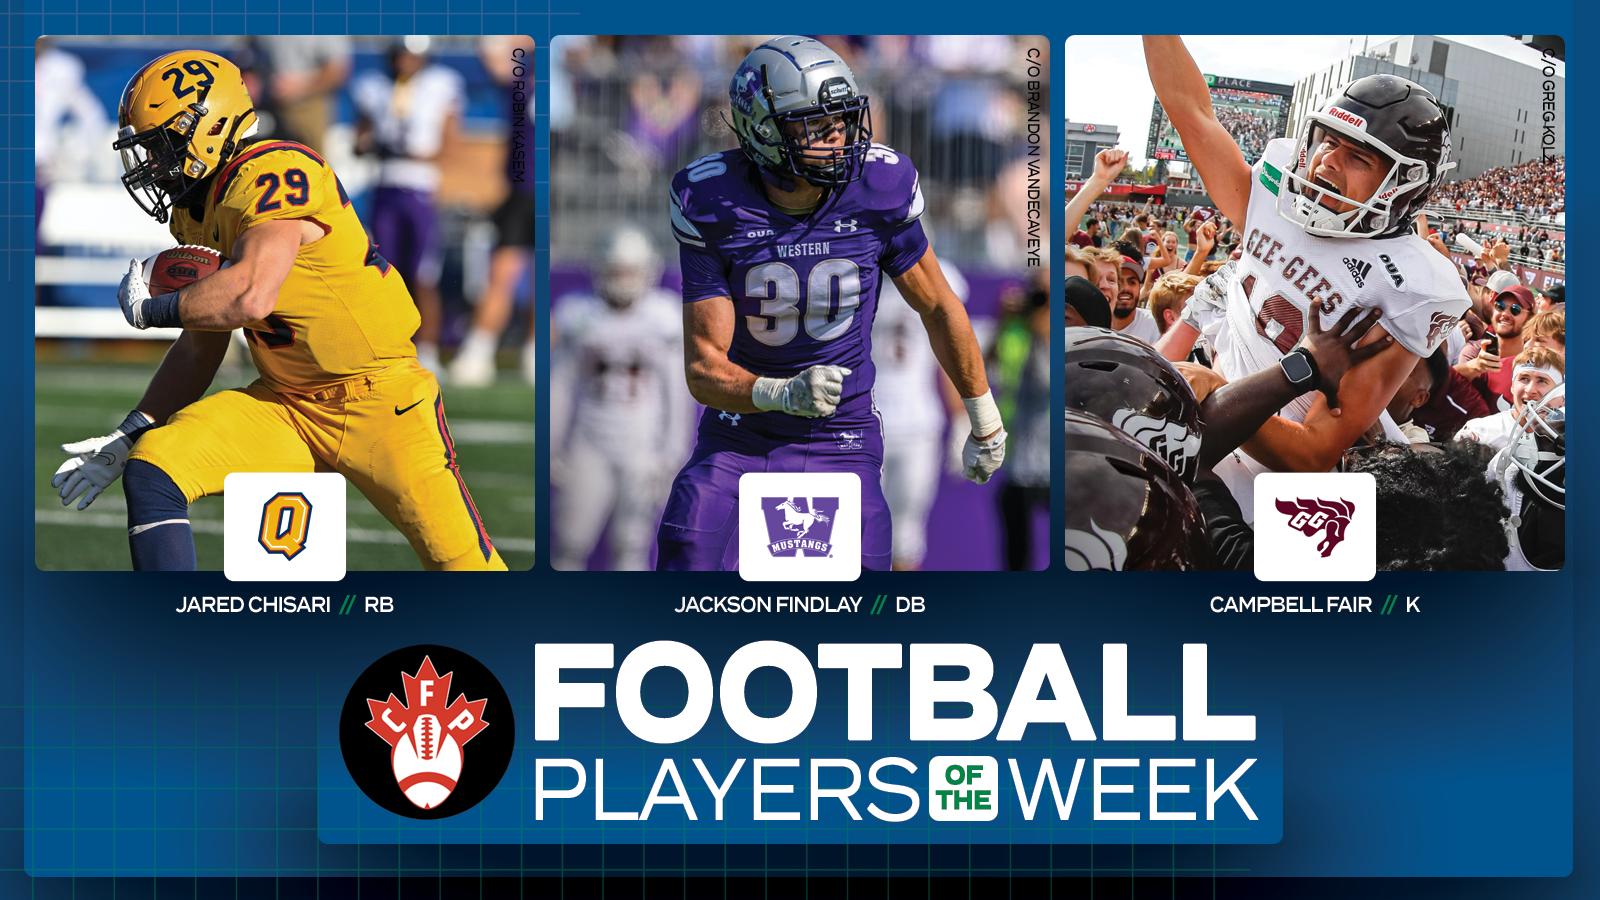 Graphic on predominantly blue background featuring action photos of Jared Chisari, Jackson Findlay, and Campbell Fair with their name and school logos placed beneath their respective photos, along with the Canadian Football Perspective logo and white text that reads 'Football Players of the Week' in the lower third